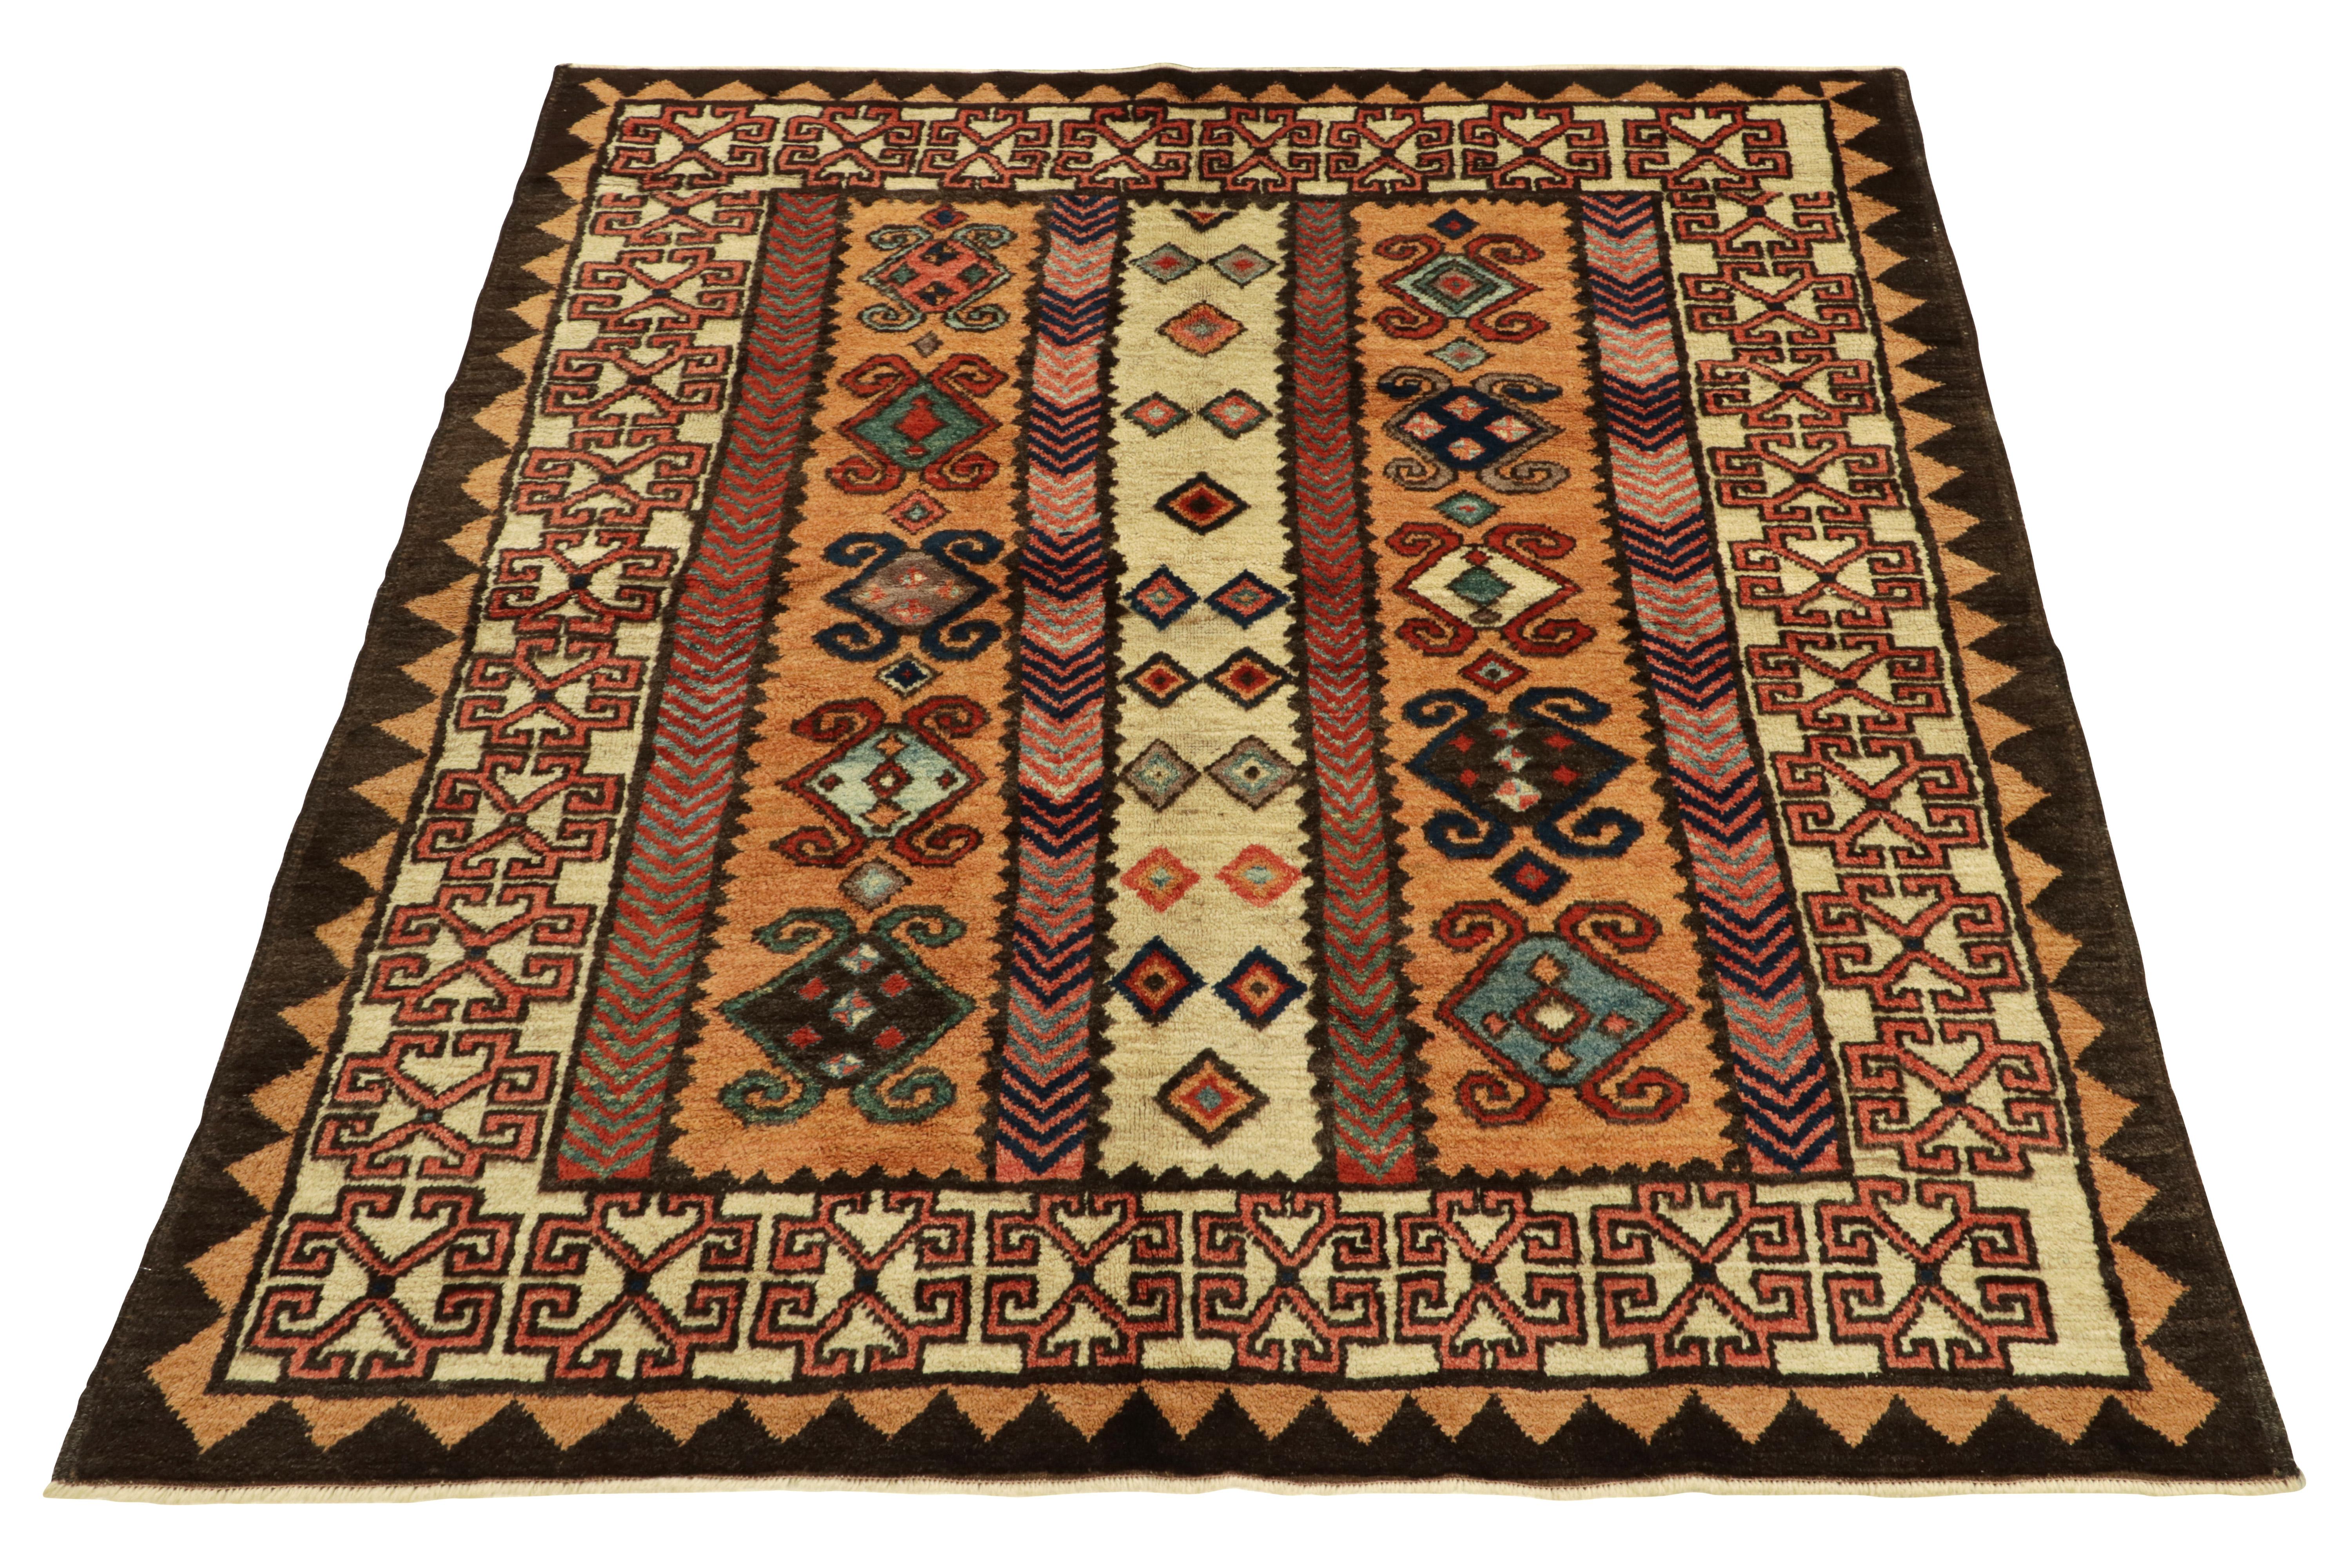 Diligently hand-knotted in wool, a spacious 6x7 vintage piece entering Rug & Kilim’s coveted Antique & Vintage collection. 

Originating from Turkey circa 1950-1960, this rug witnesses tribal geometric patterns on a delicious beige brown scale